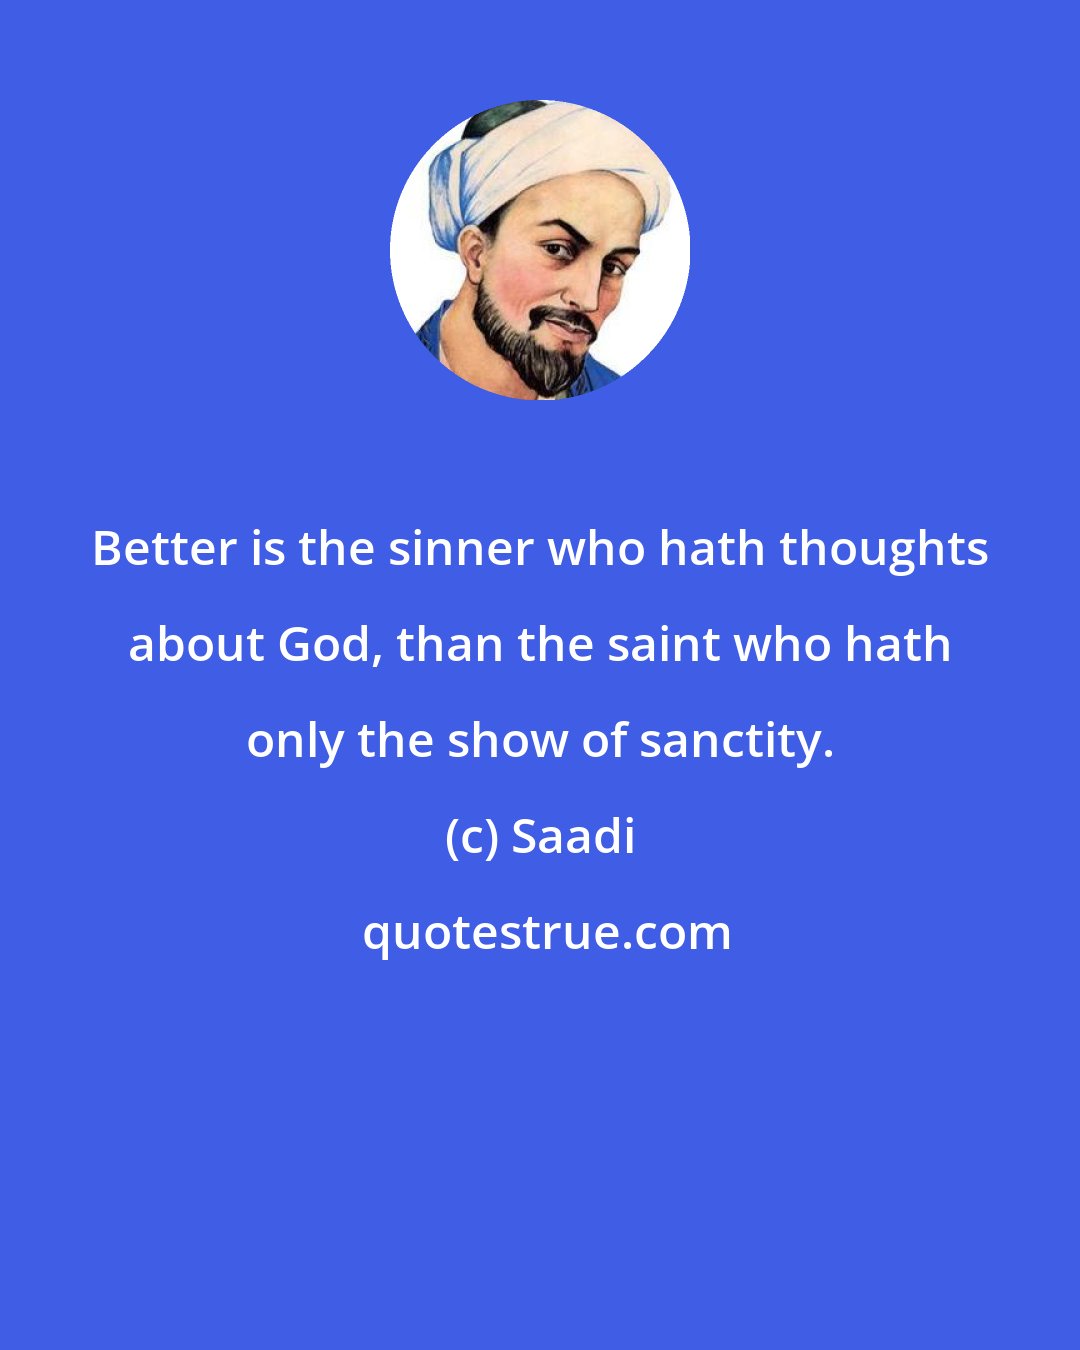 Saadi: Better is the sinner who hath thoughts about God, than the saint who hath only the show of sanctity.